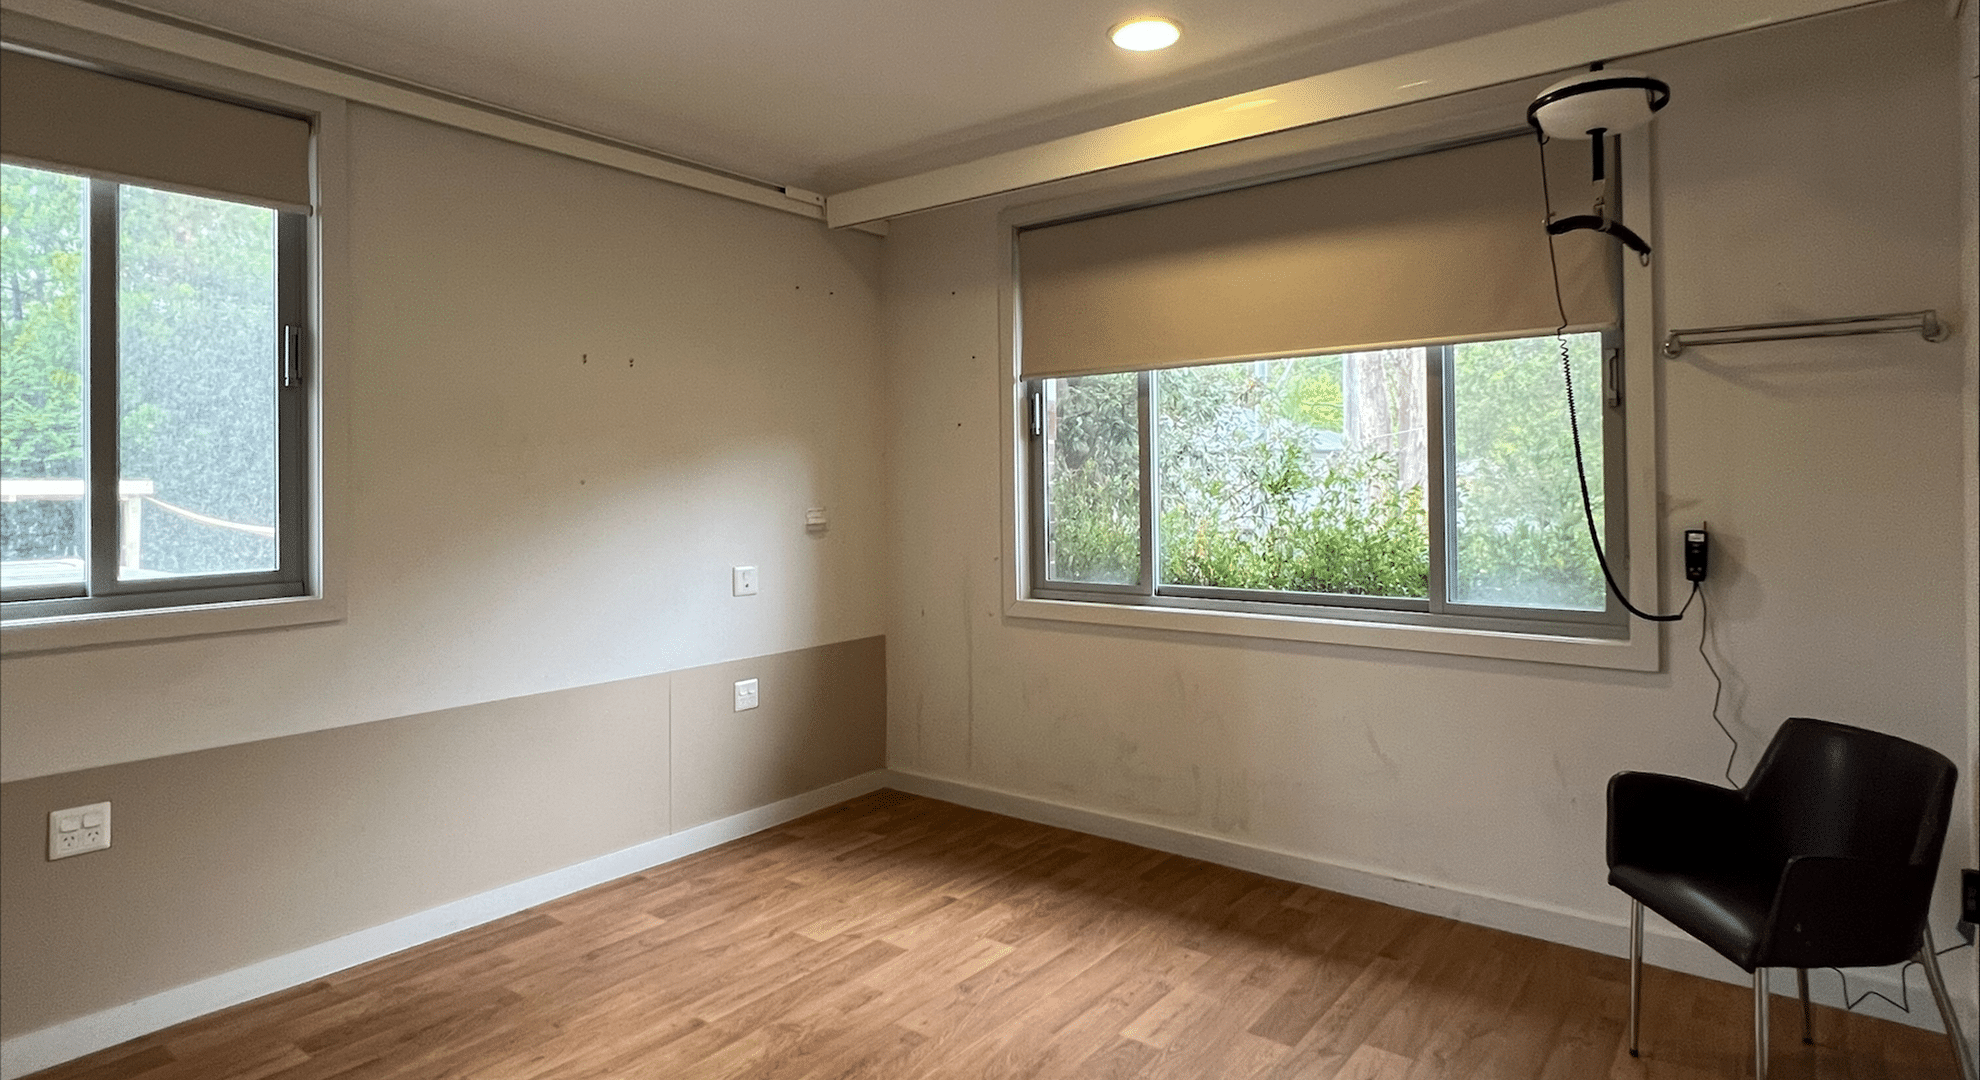 The empty bedroom with large windows and wooden floorboards.